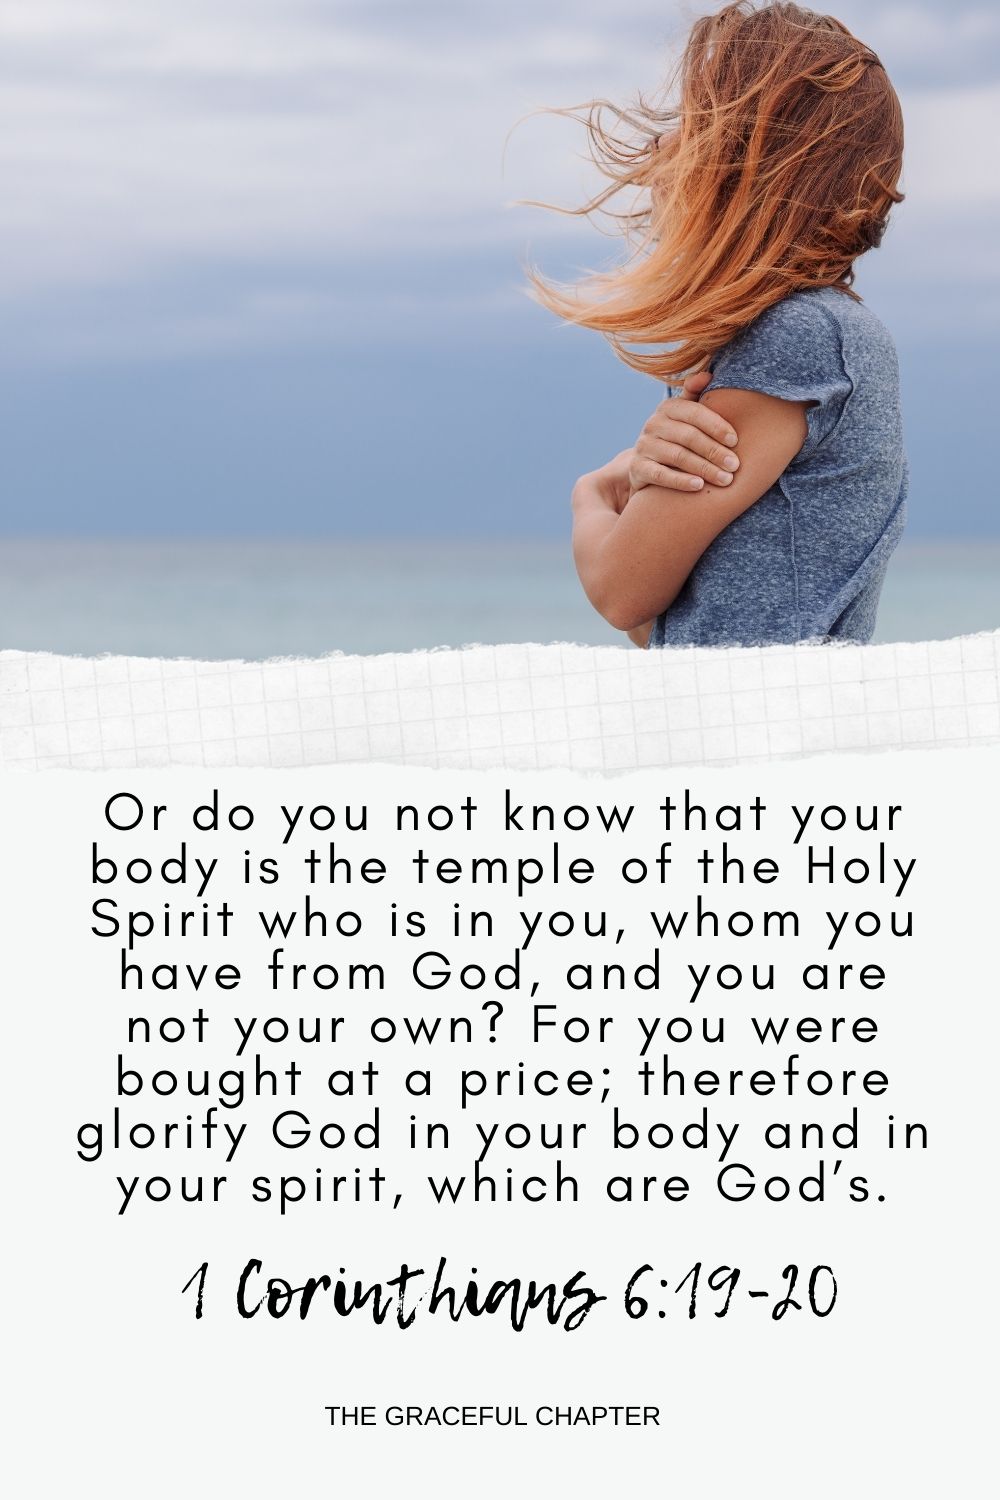 Or do you not know that your body is the temple of the Holy Spirit who is in you, whom you have from God, and you are not your own? For you were bought at a price; therefore glorify God in your body and in your spirit, which are God’s. 1 Corinthians 6:19-20